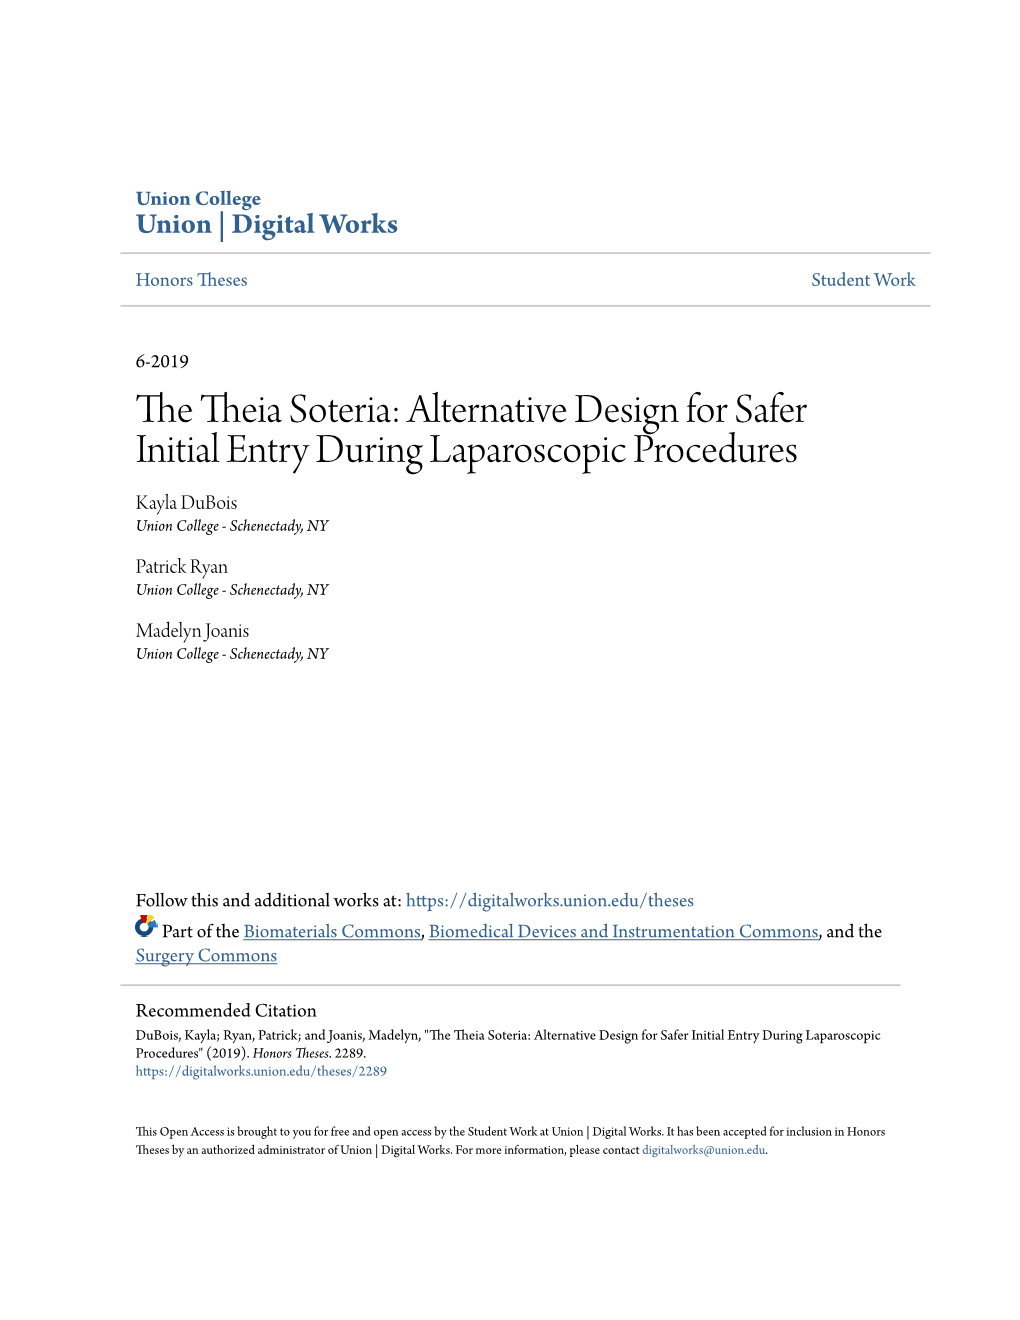 Alternative Design for Safer Initial Entry During Laparoscopic Procedures Kayla Dubois Union College - Schenectady, NY